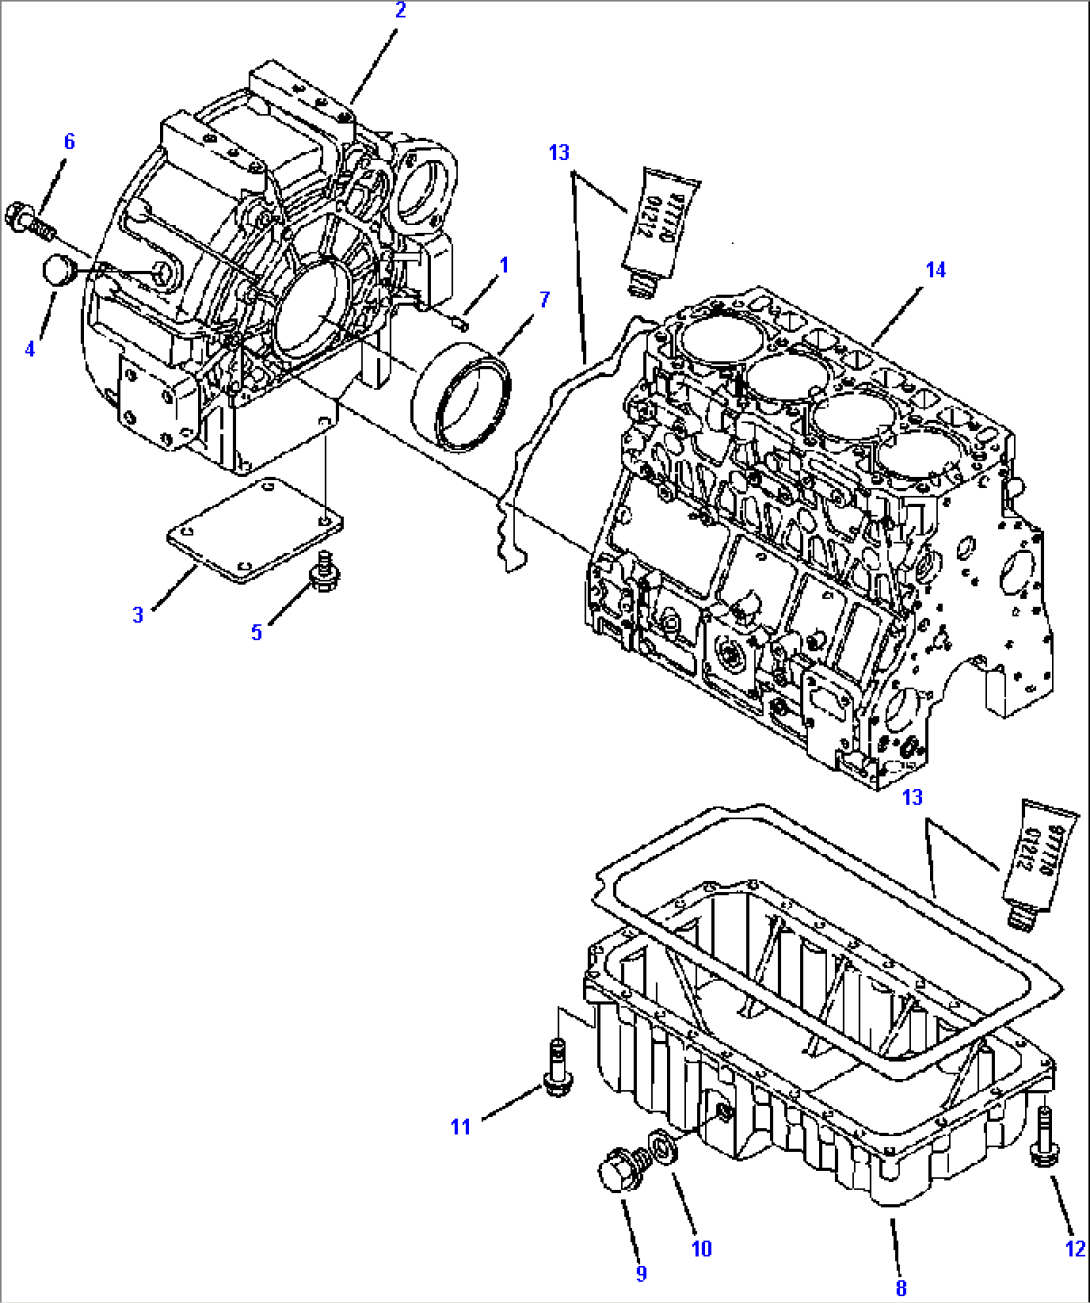 FIG. A0112-01A0 TIER I OR II ENGINE - FLYWHEEL HOUSING AND OIL PAN